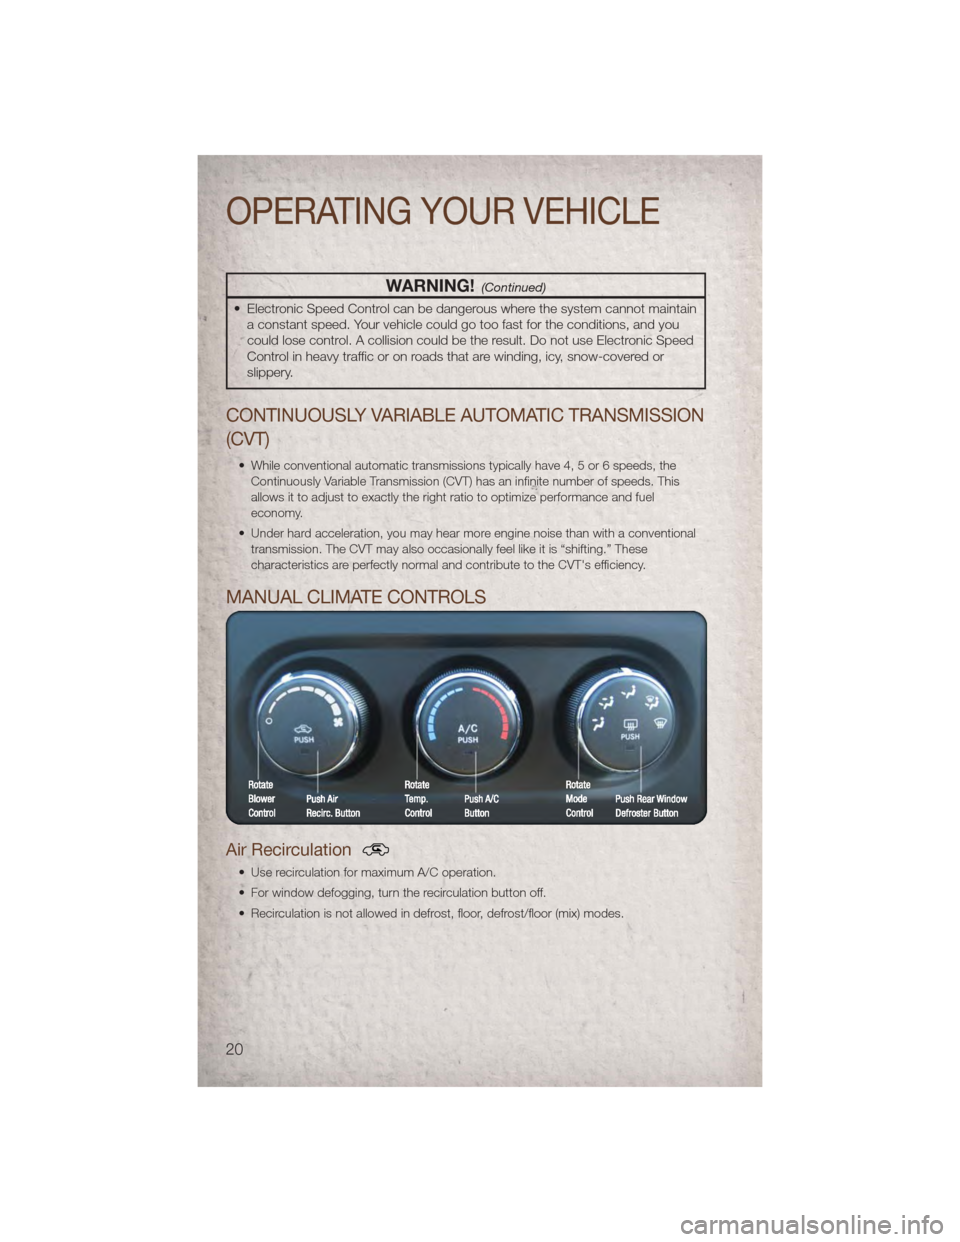 JEEP PATRIOT 2011 1.G Owners Manual WARNING!(Continued)
• Electronic Speed Control can be dangerous where the system cannot maintaina constant speed. Your vehicle could go too fast for the conditions, and you
could lose control. A col